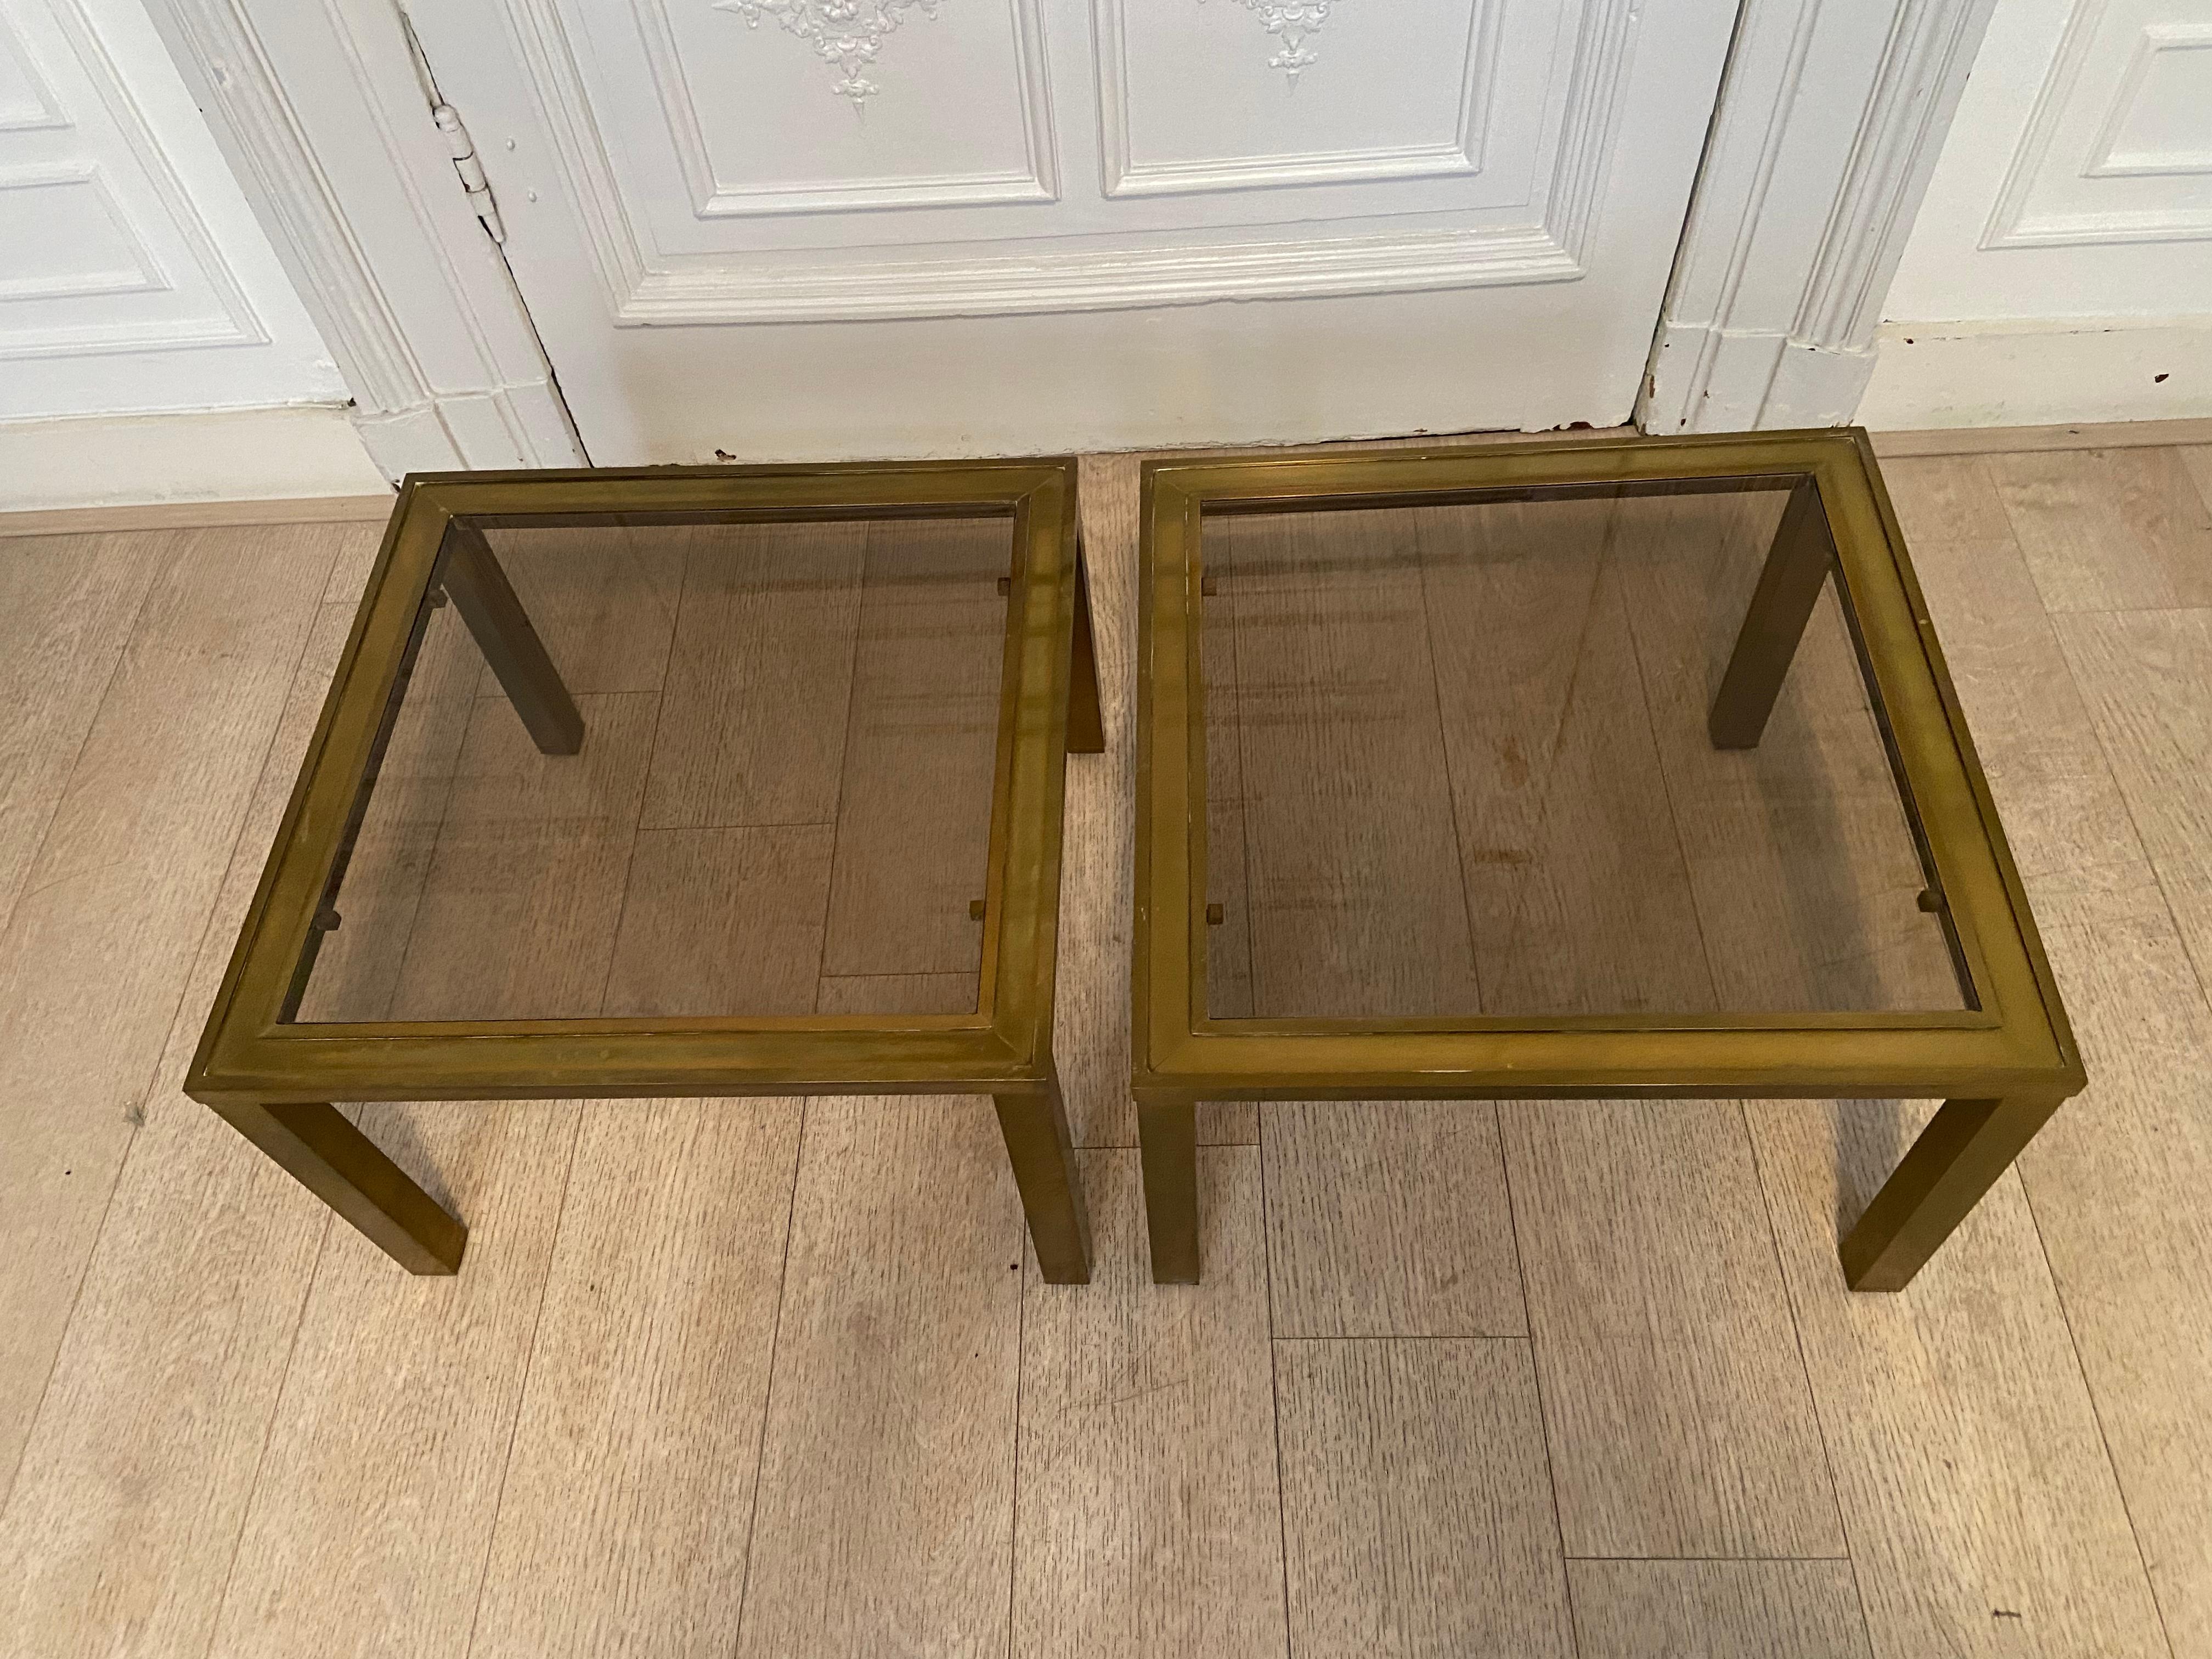 Solid brass side tables, 1970s.